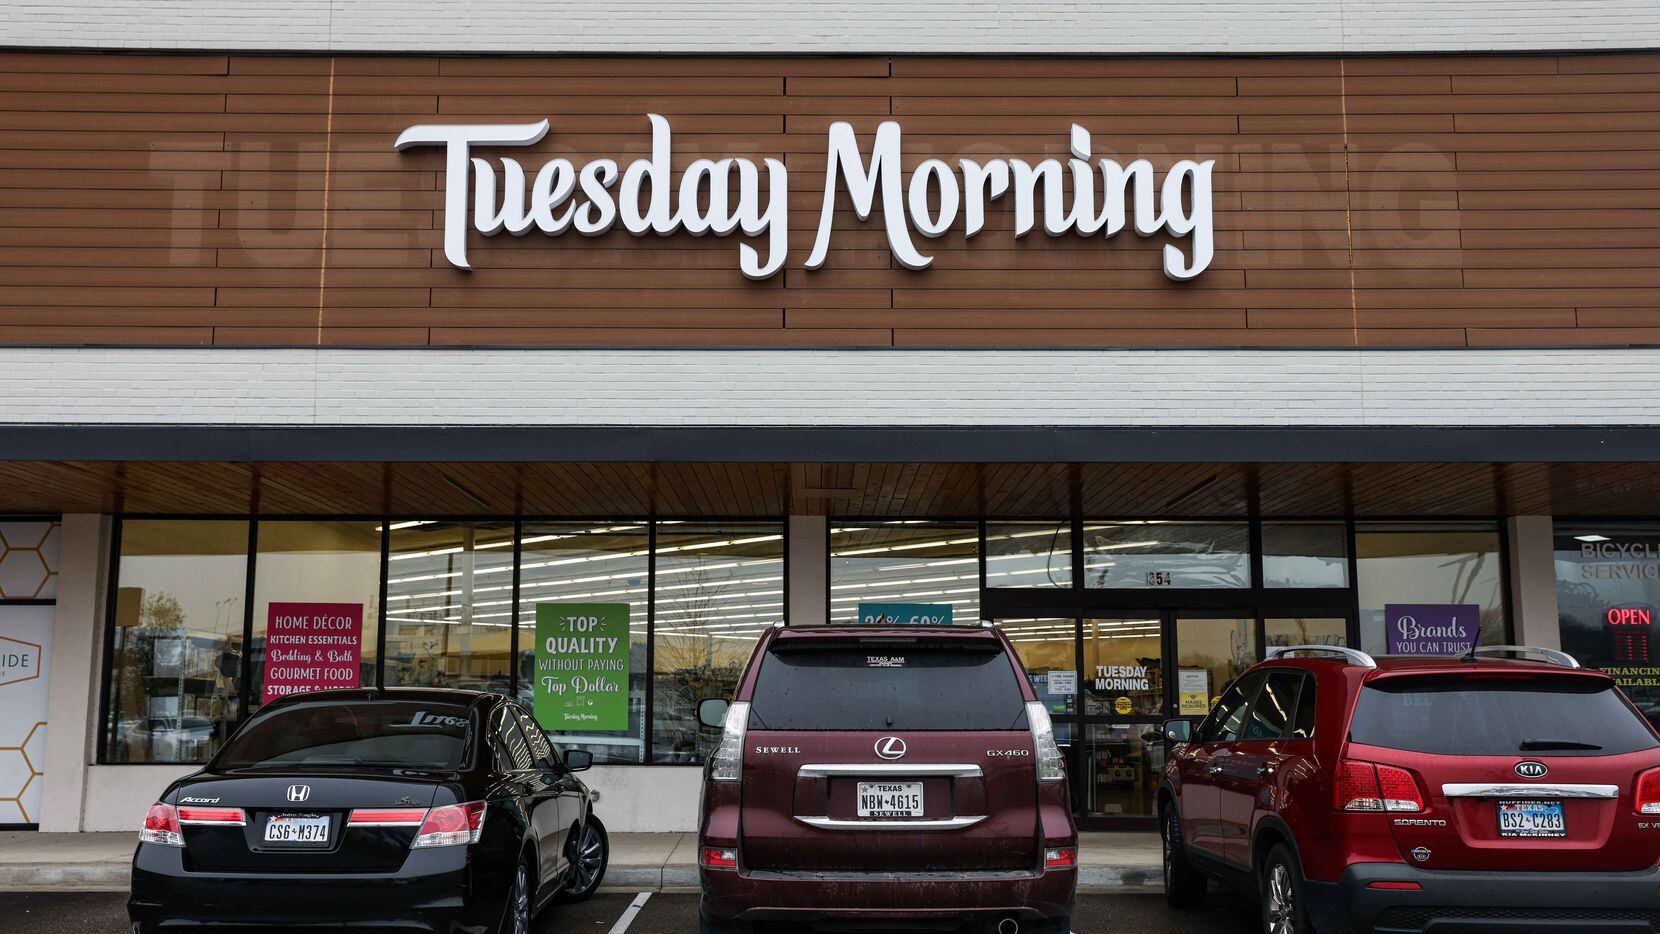 The Tuesday Morning store in Hillside Village in Dallas is shown in 2021. Dallas-based...